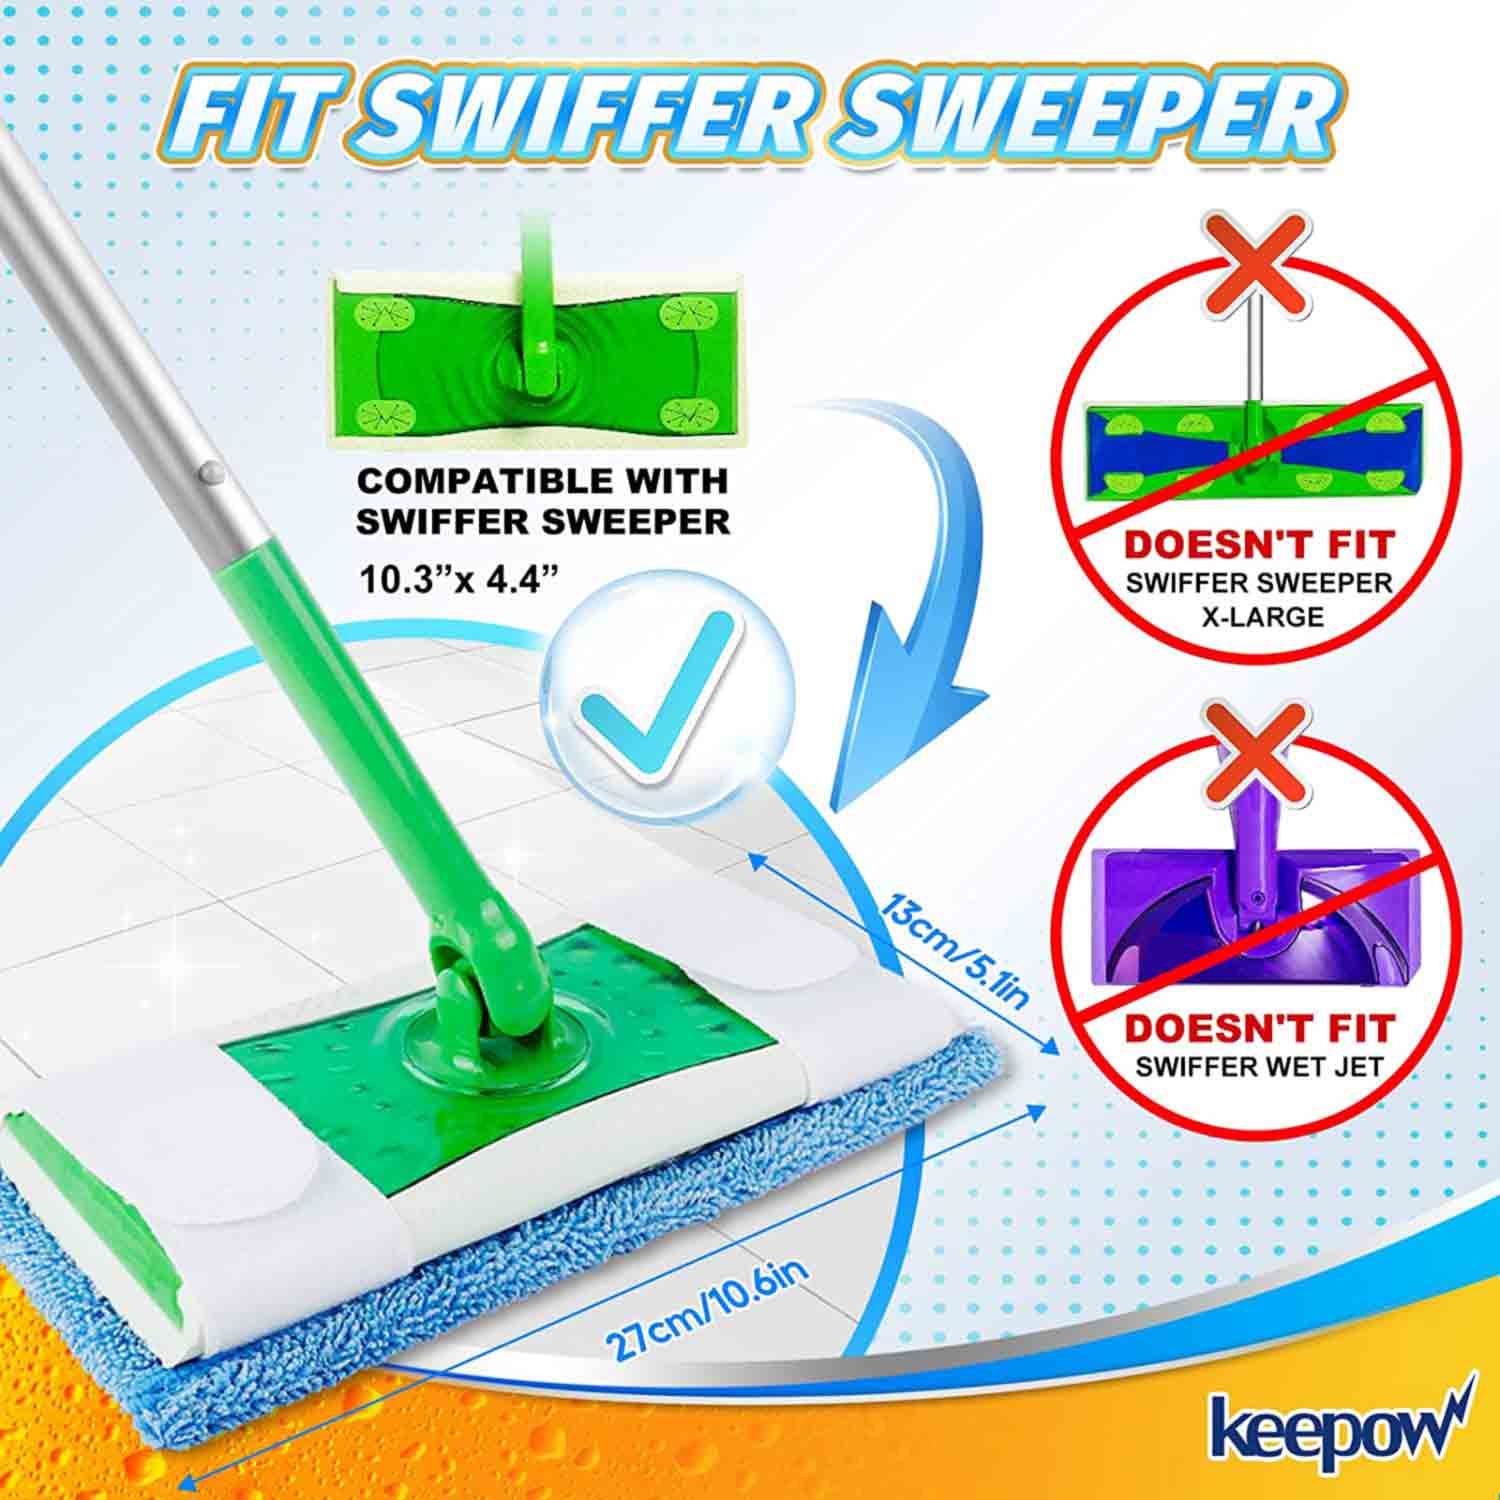 KEEPOW Reusable Microfiber Pads Compatible with Swiffer Sweeper Mops, Washable Dry Sweeping Cloths, Mopping Refills Cloths for Wet and Dry Sweeping, 2 Pack